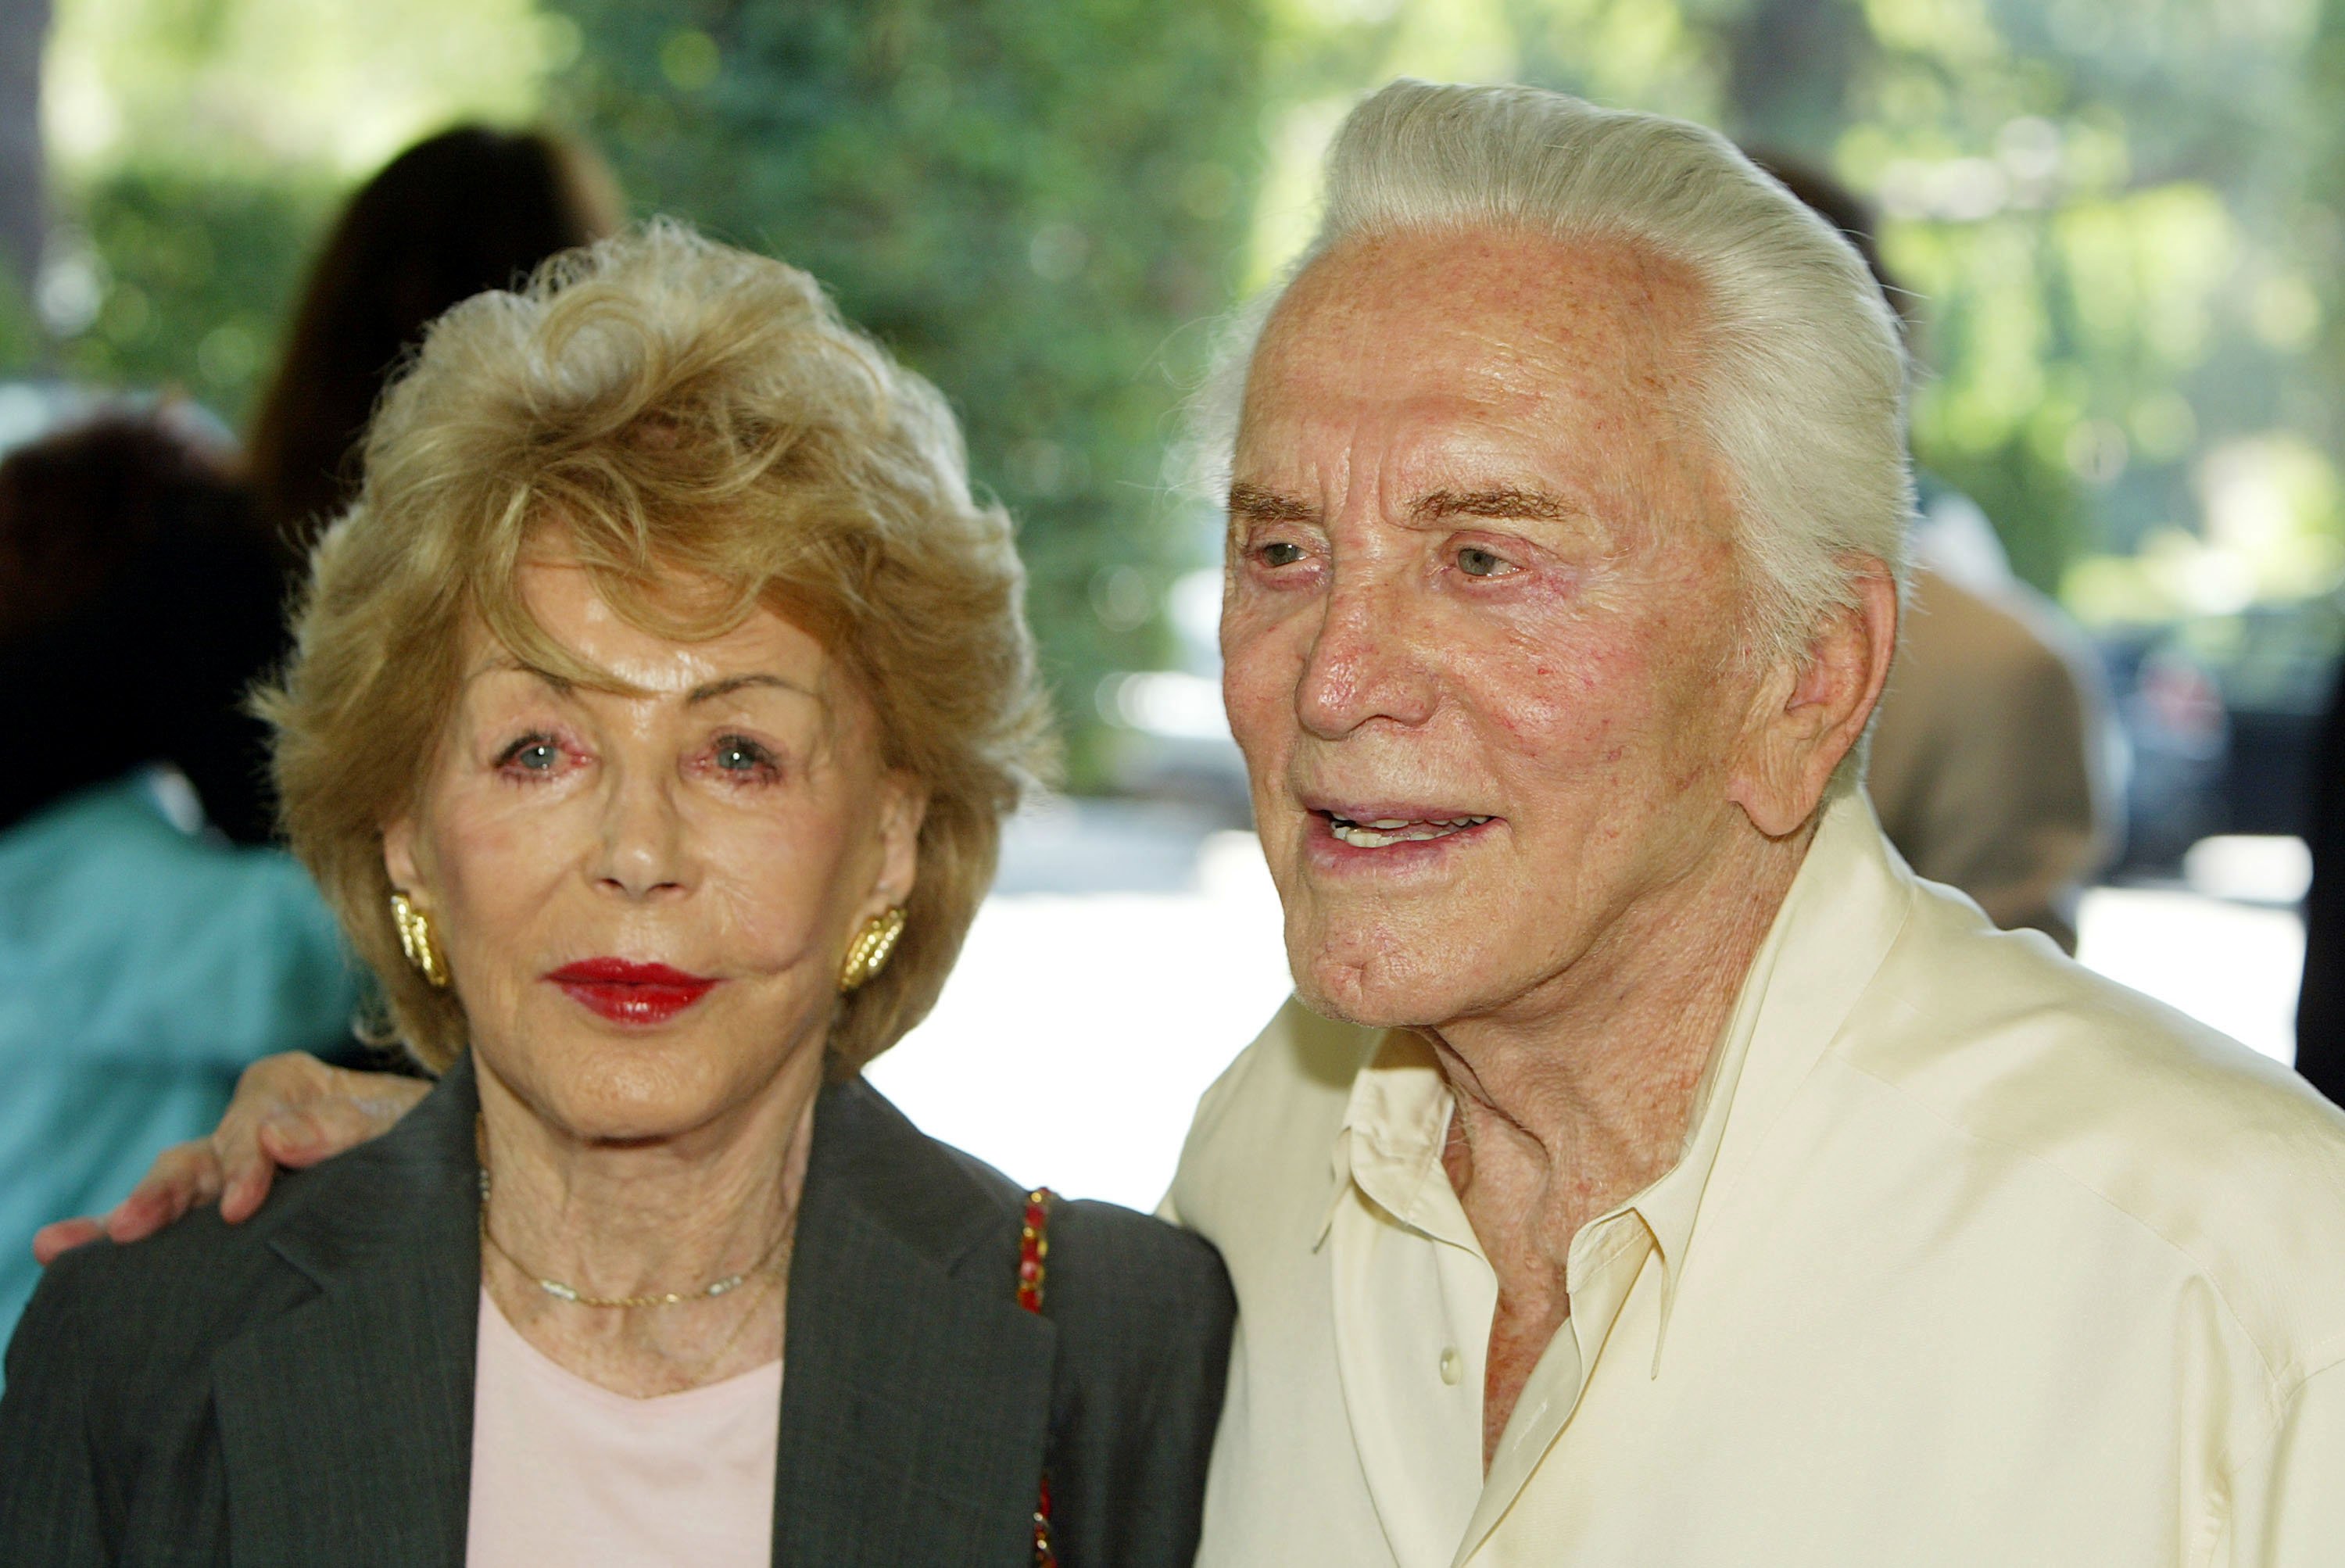 Actor Kirk Douglas (right) and his wife Anne arrive at the annual Hollywood Foreign Press Association installation luncheon on August 11, 2004, at the Beverly Hills Hotel, in Beverly Hills, California. | Source: Getty Images.